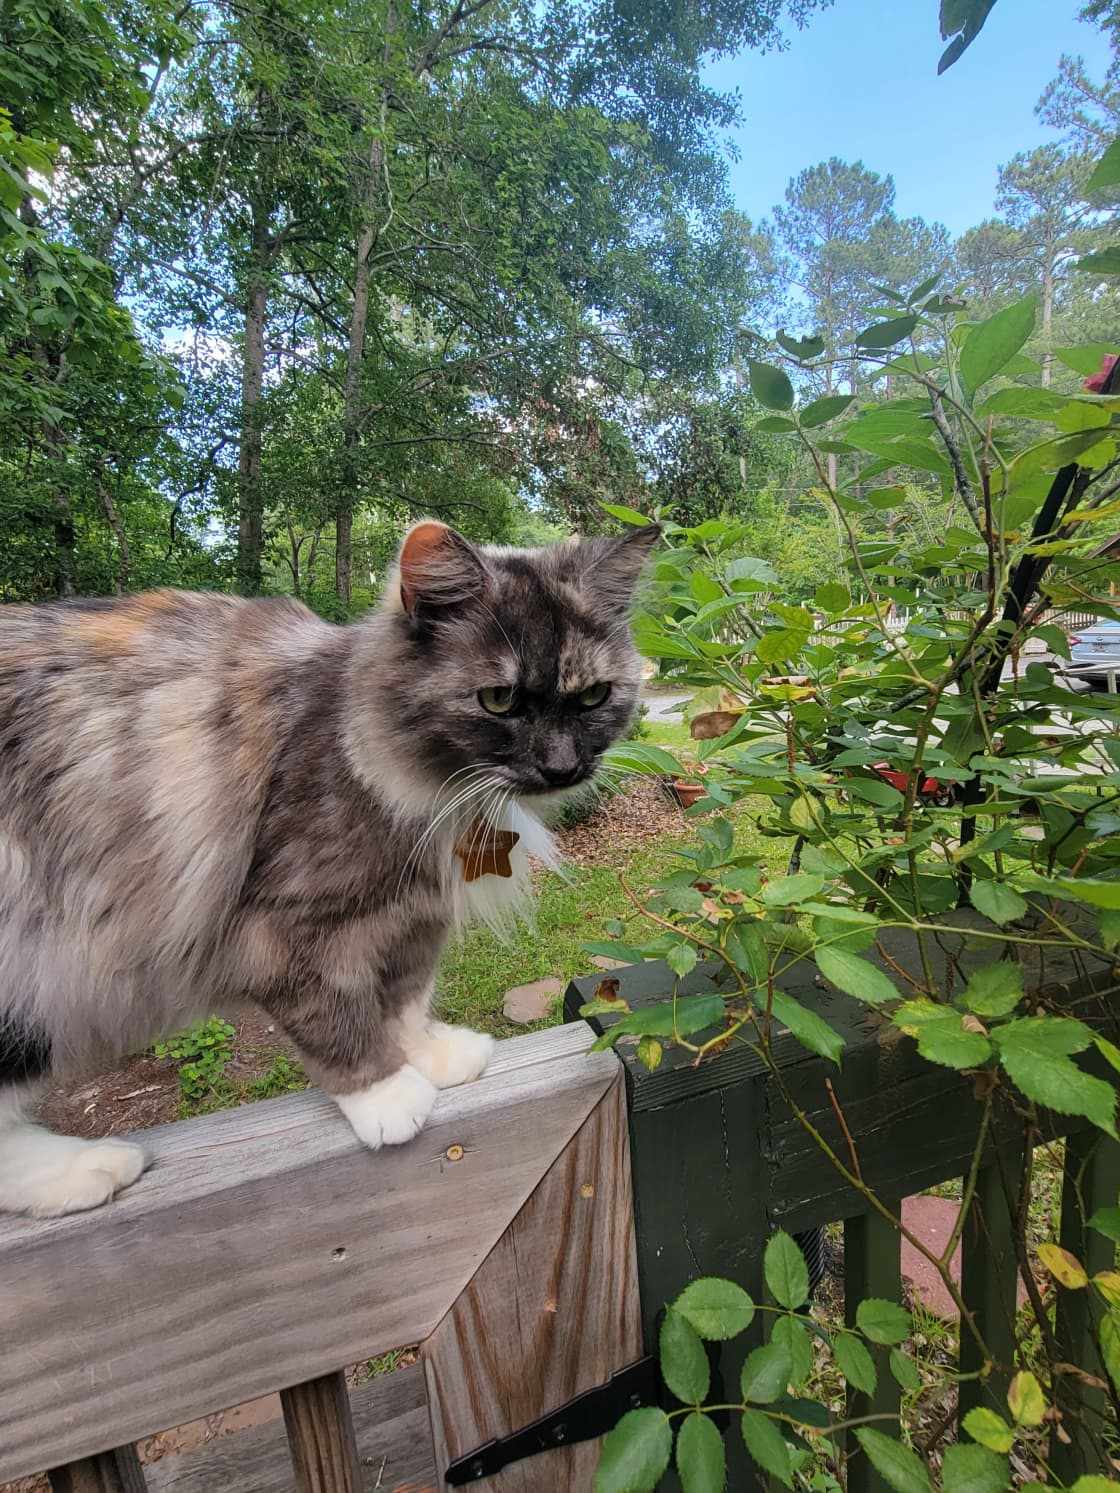 Our garden cat Stevie who will always greet you, so keep a watchful eye out for her.